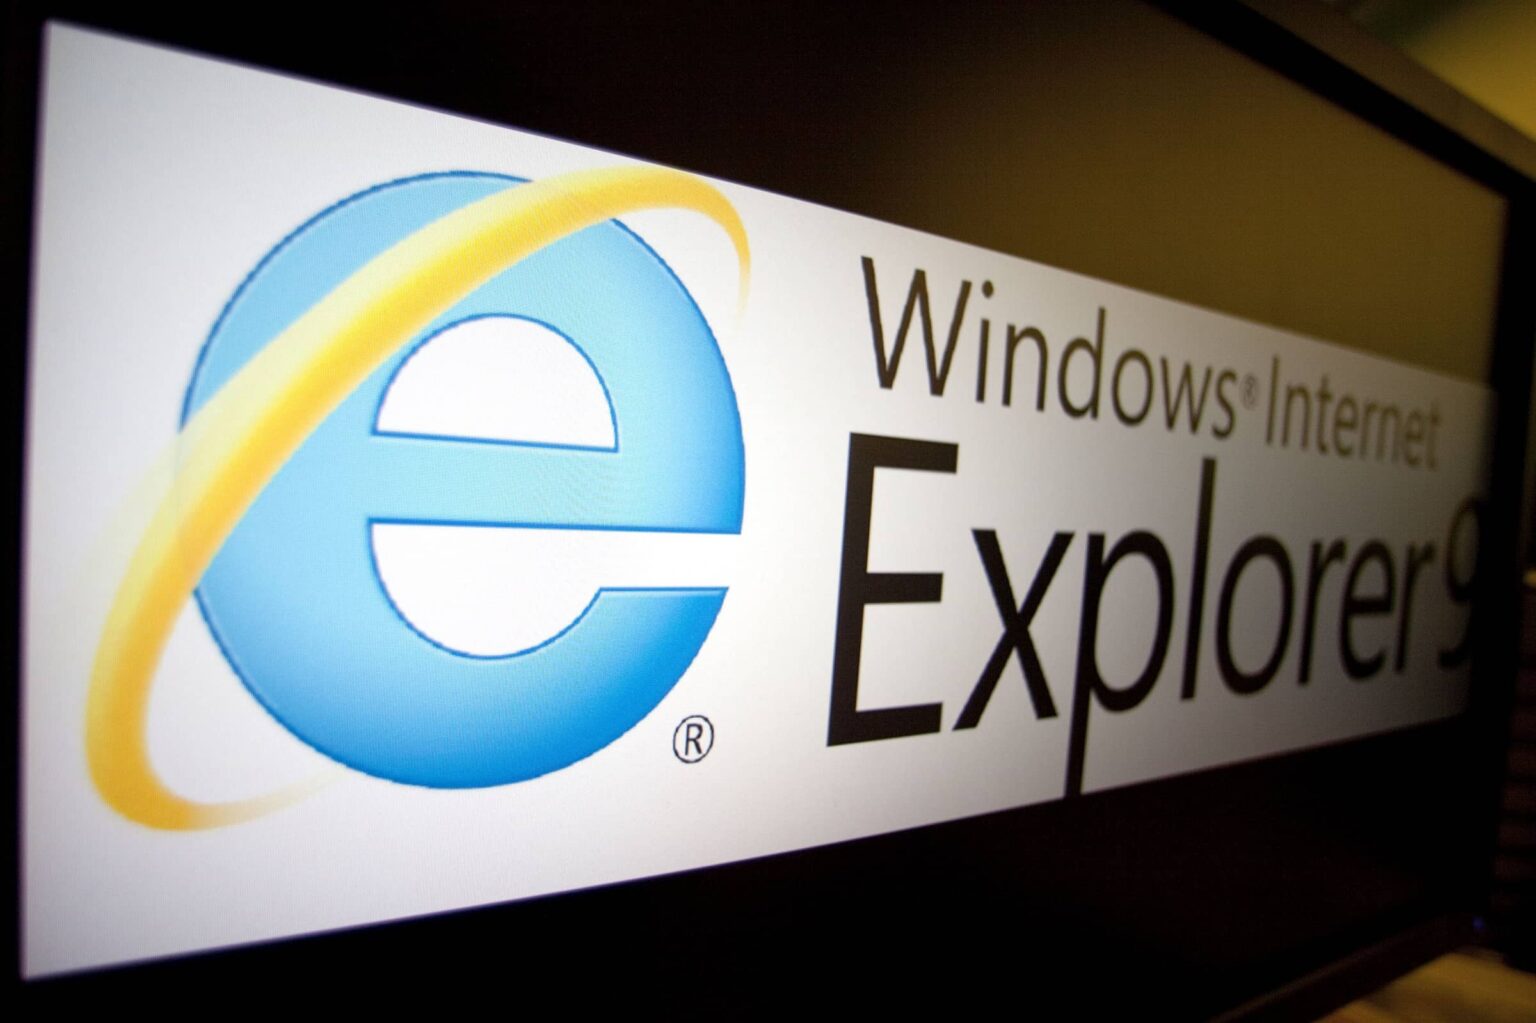 Here's one final Internet Explorer update: the legendary browser is done! Clear your cookies one last time and find out what Microsoft wants you to do next.